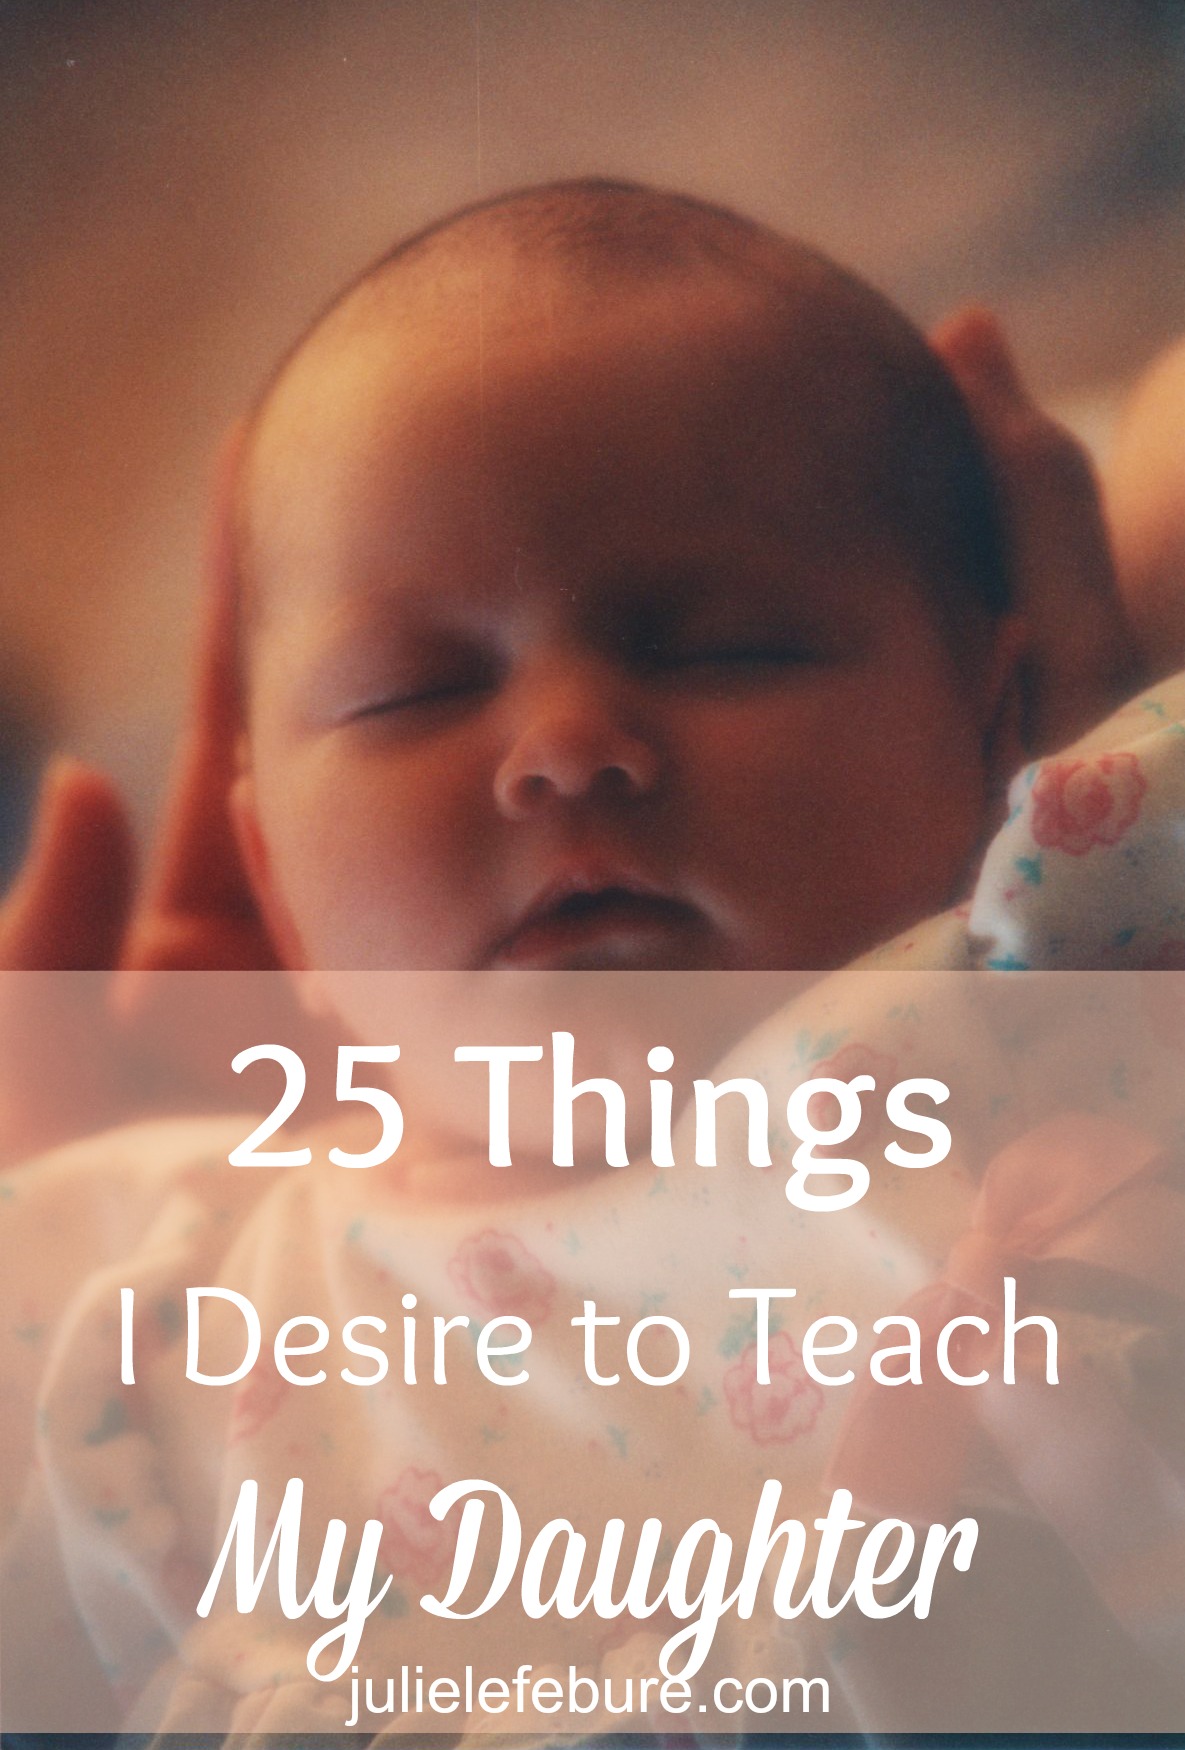 25 Things I Desire to Teach My Daughter